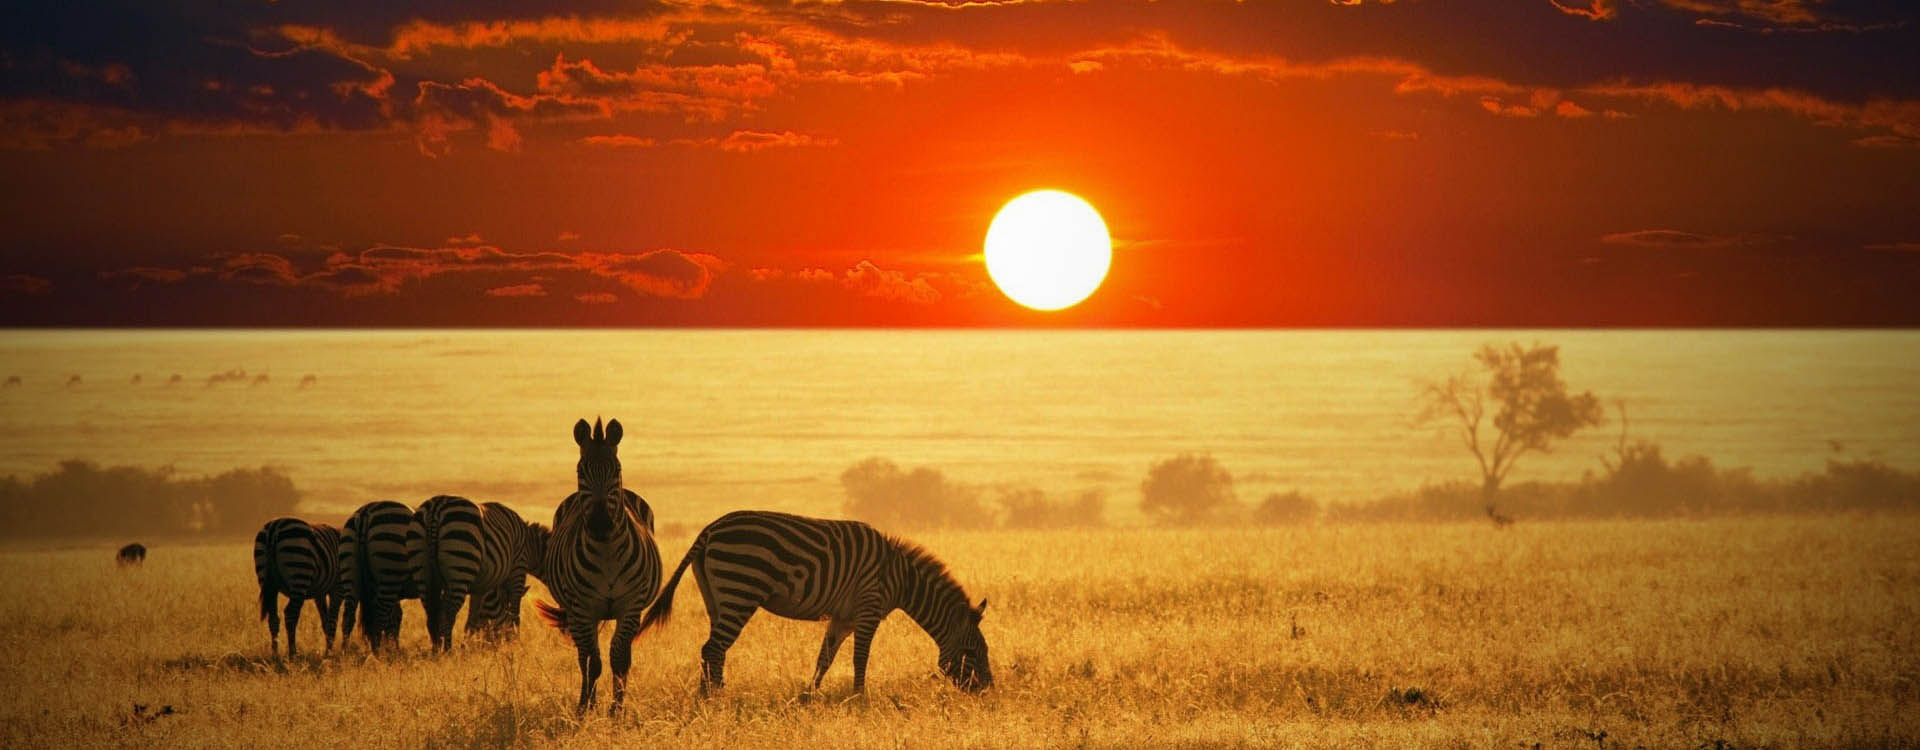 Africa Travel by AfriChoice Safaris